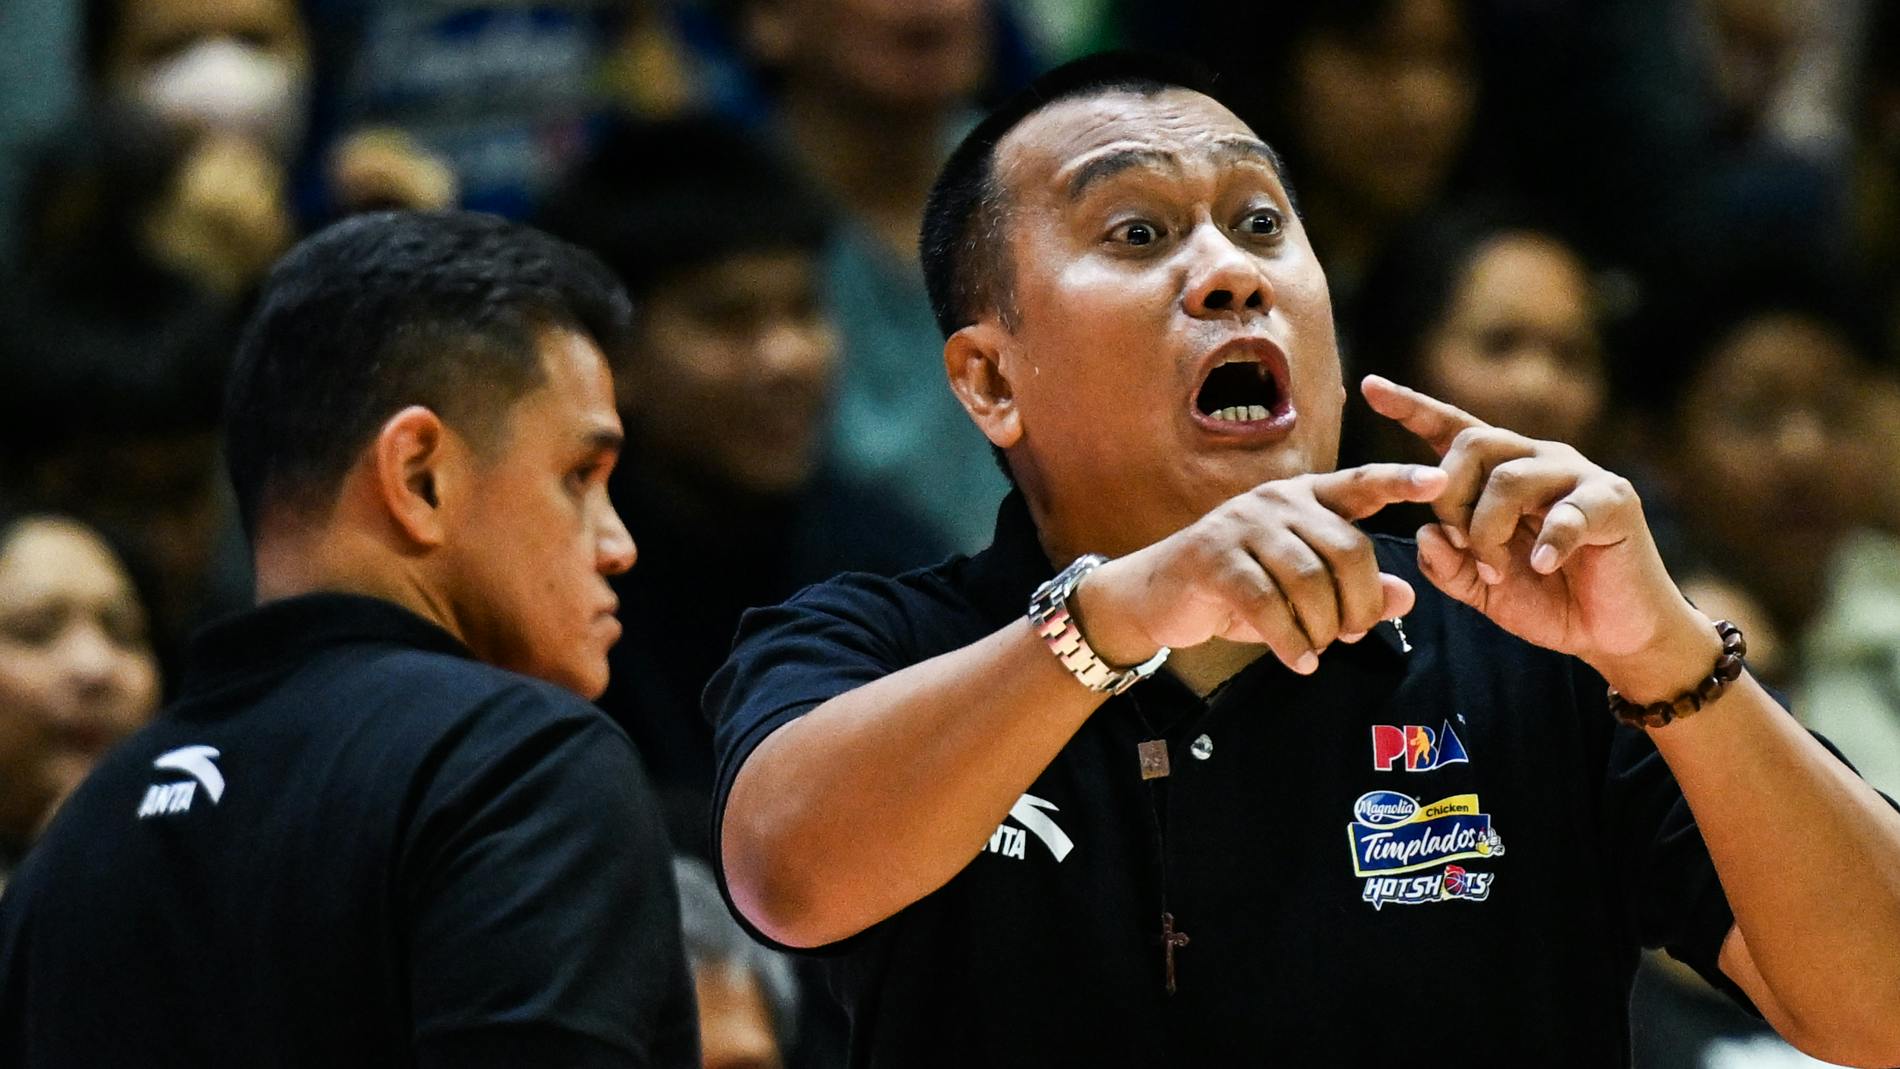 PBA: Chito Victolero will be ‘long-term coach’ for Magnolia, says team official